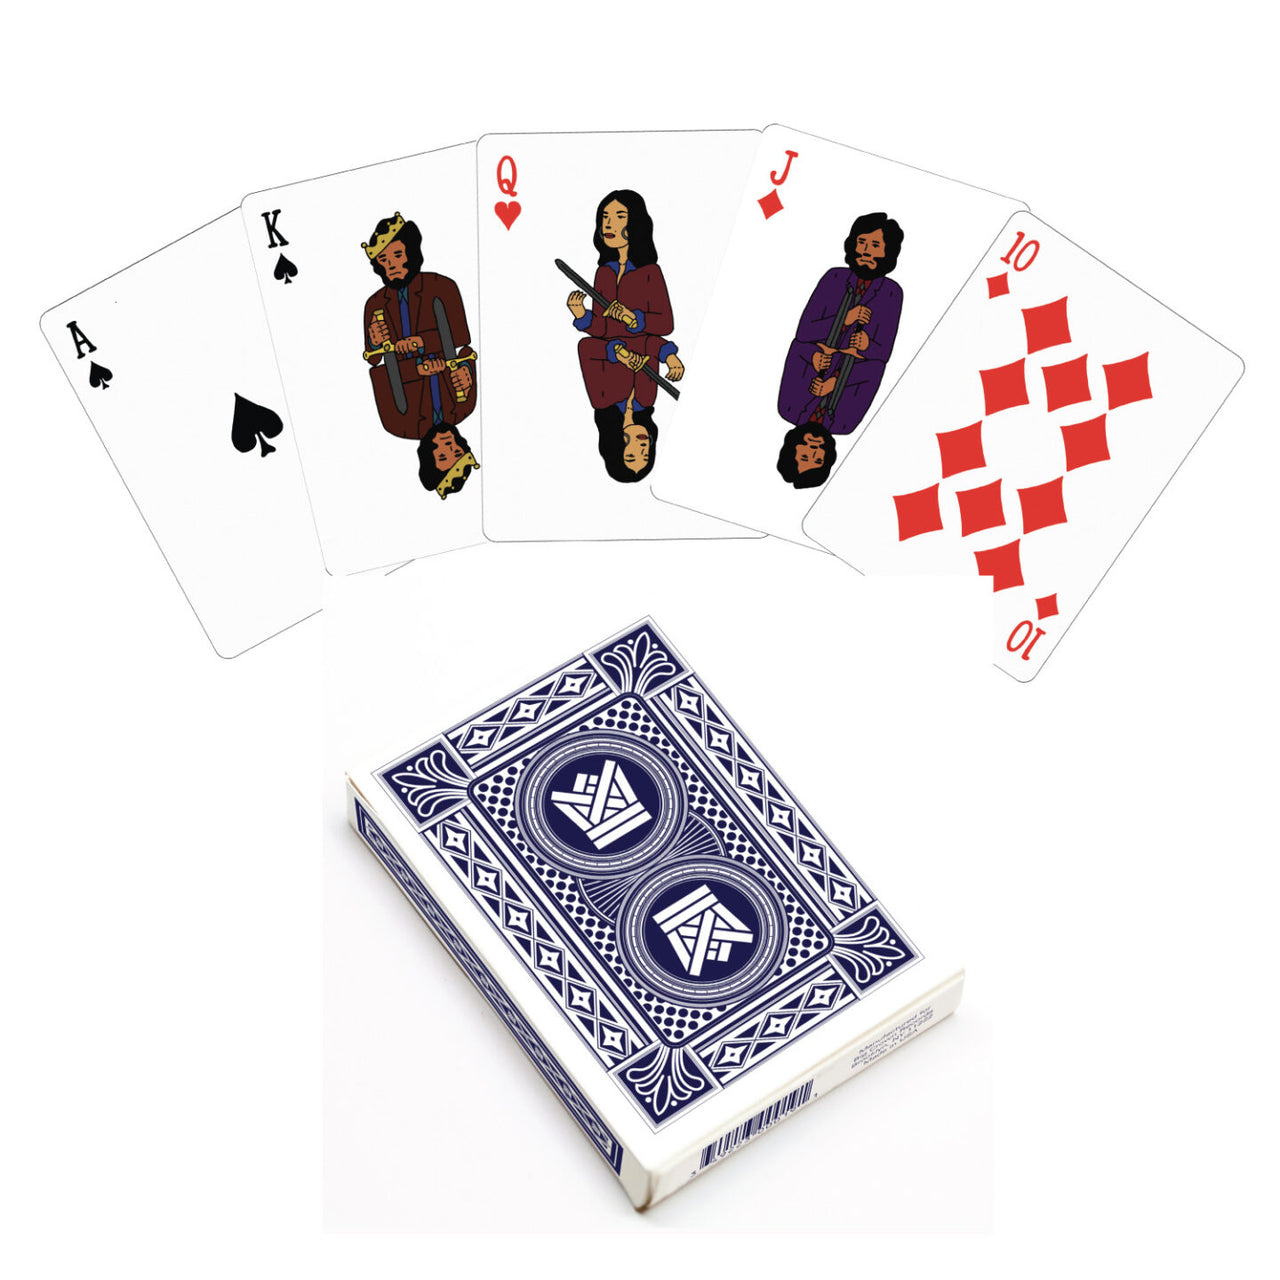 Big Crown Records x El Oms Playing Cards